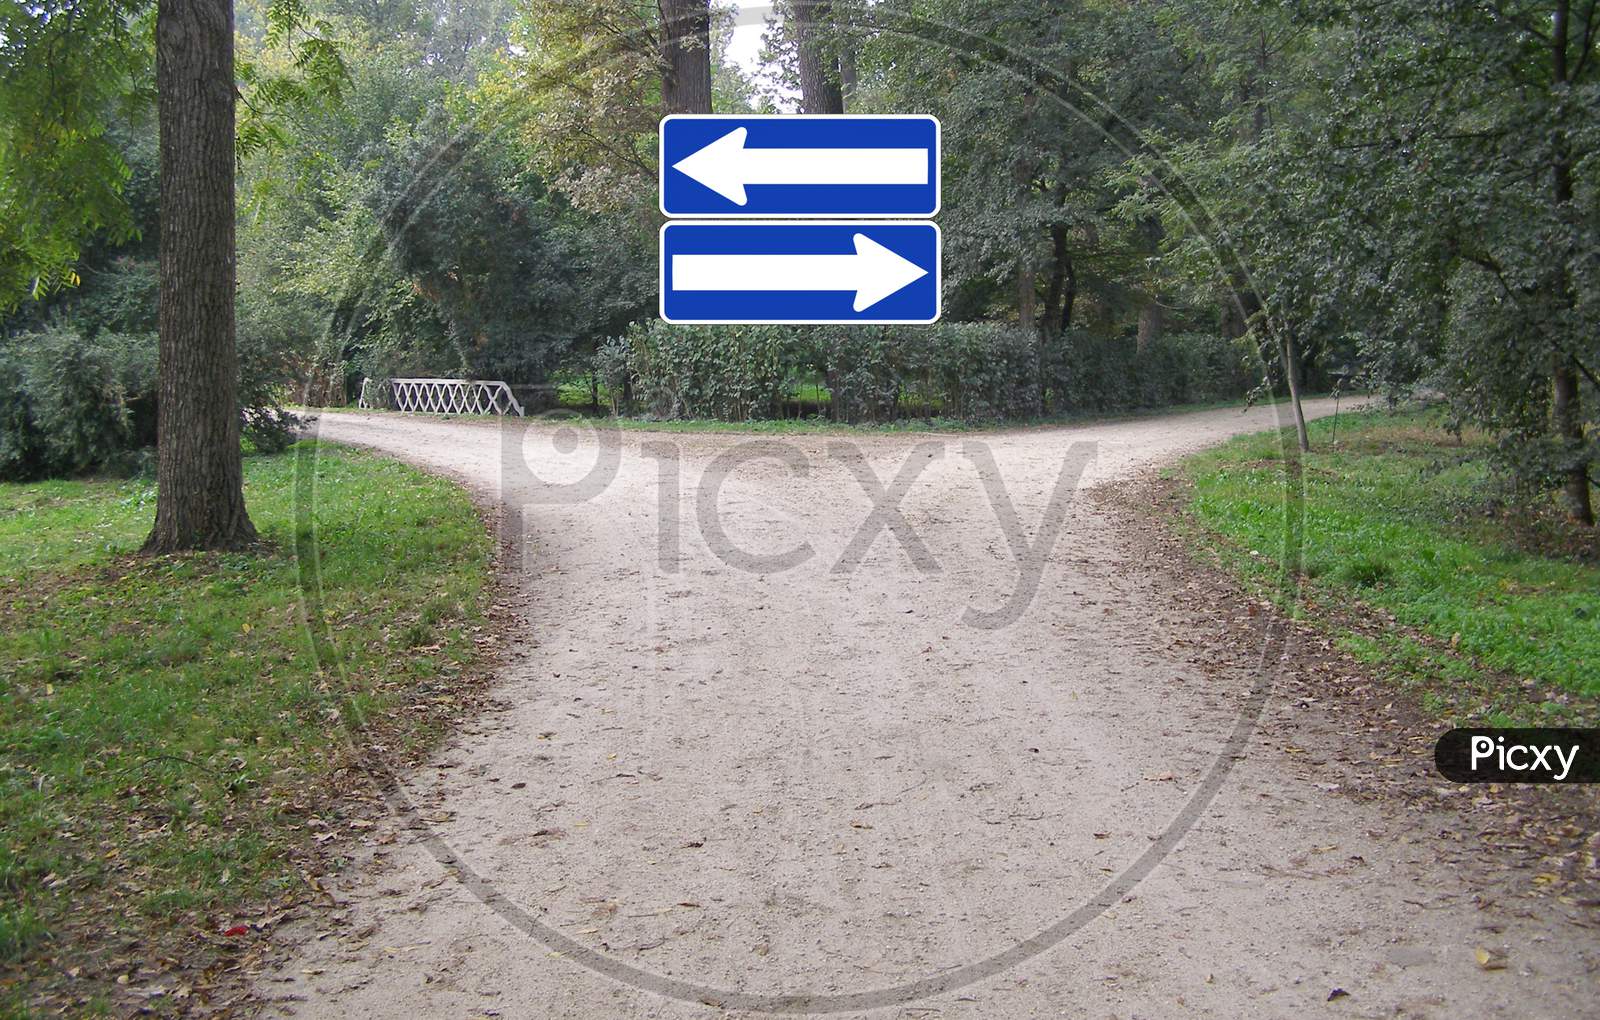 Choice Direction Signs